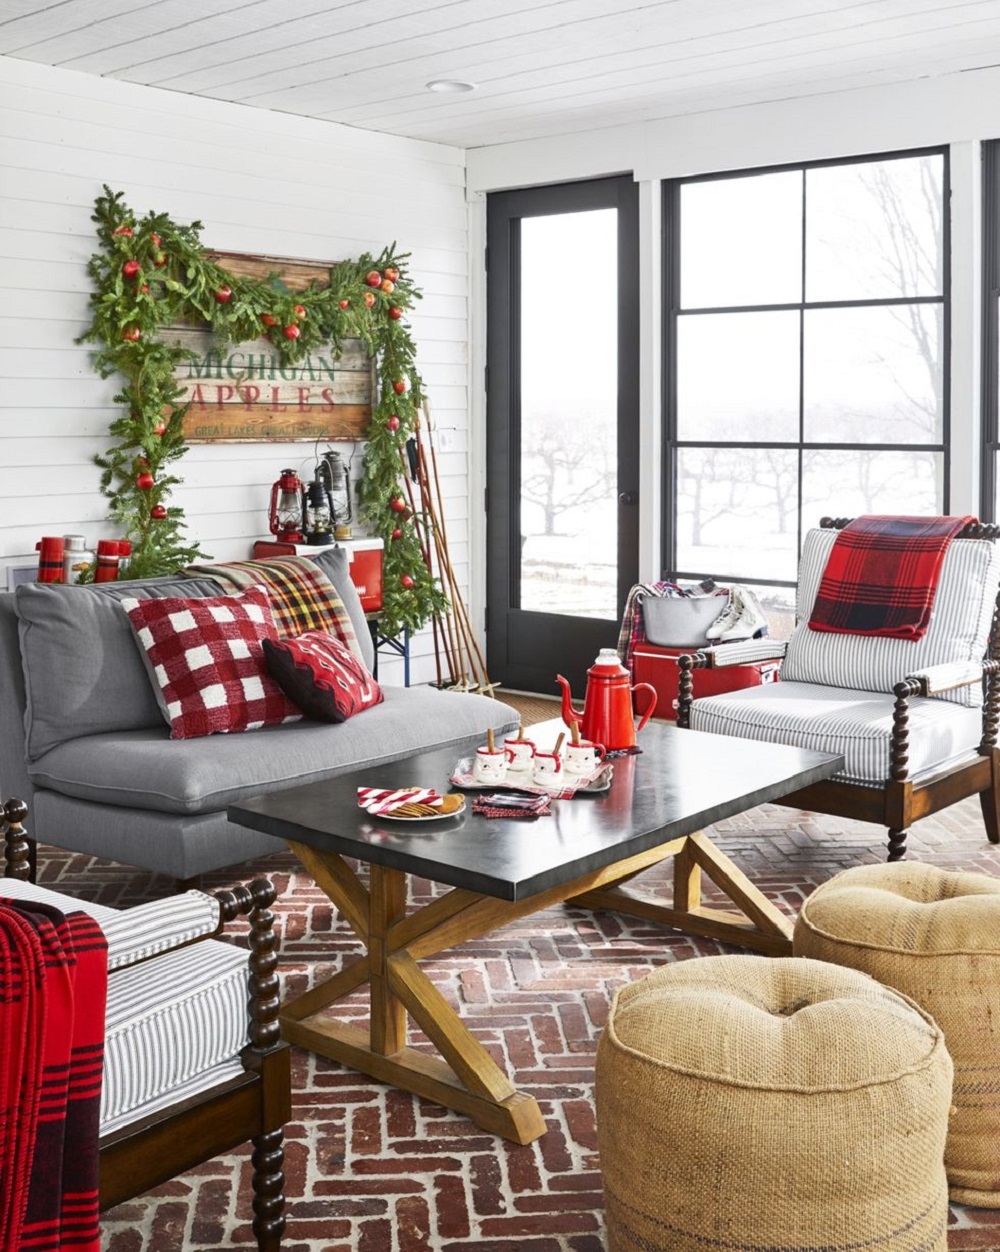 t3-137 Christmas living room decorations you must try in the holiday season